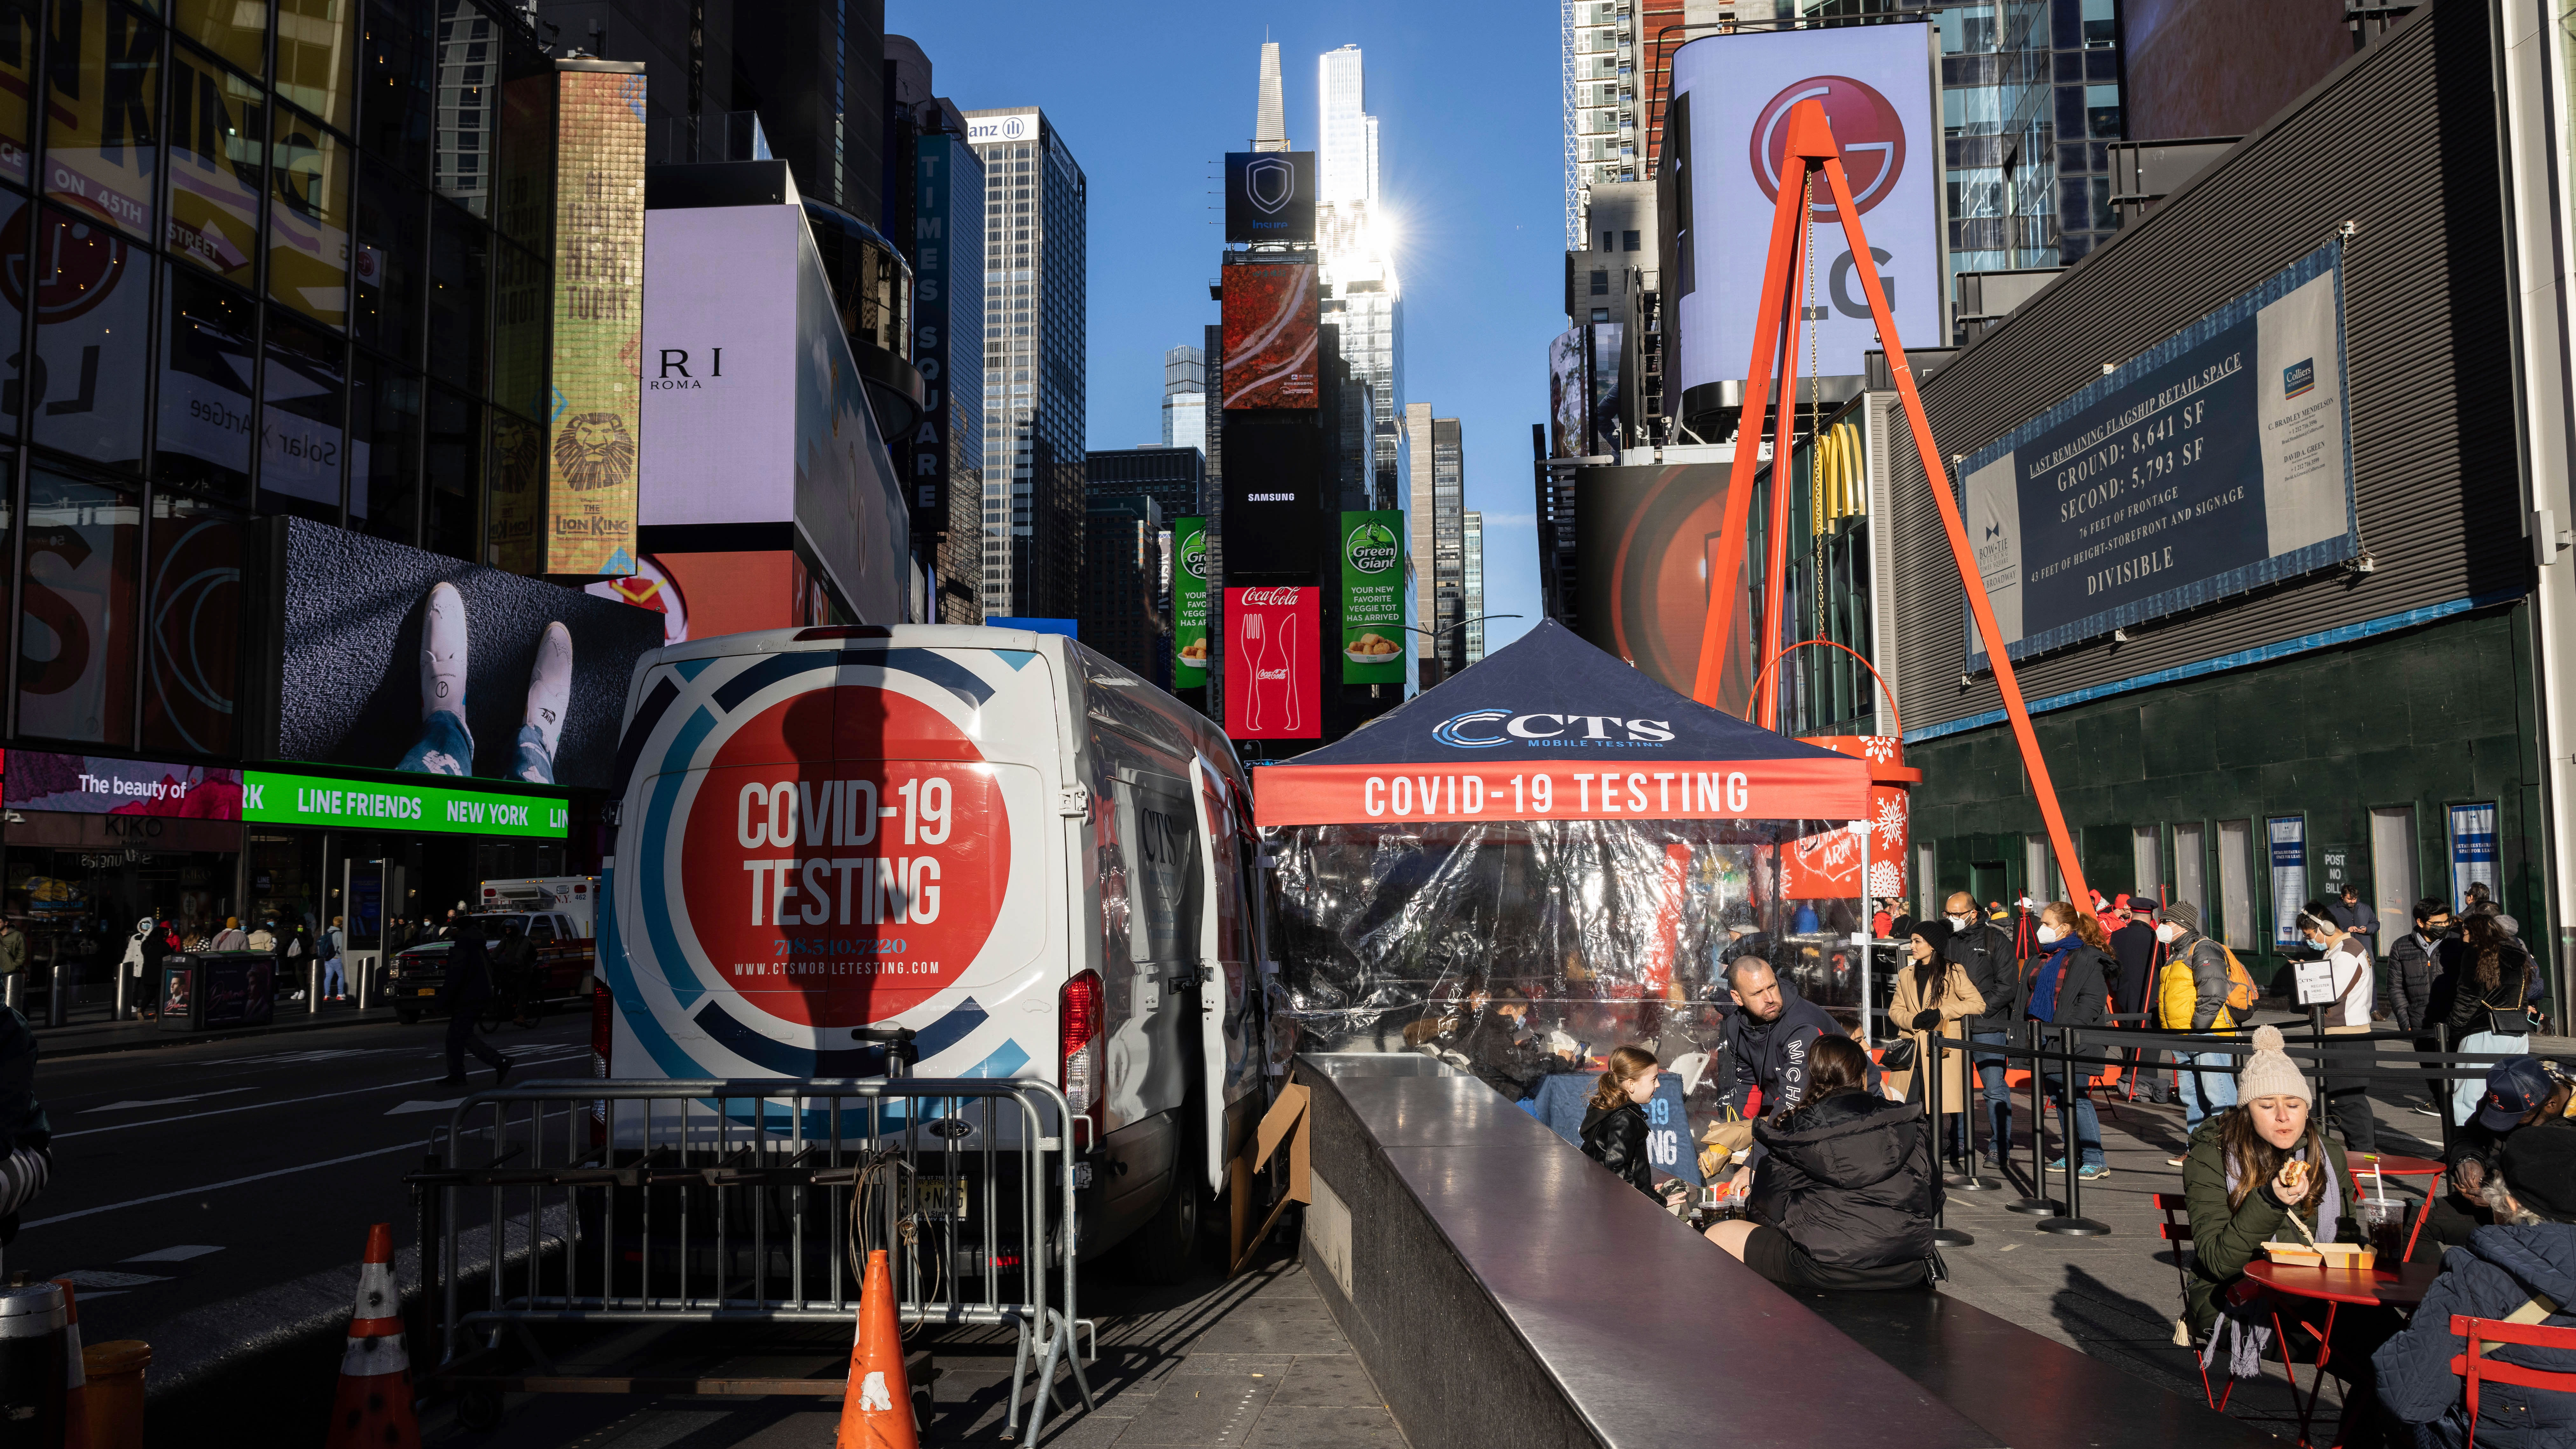 A COVID-19 testing site is seen in Times Square.